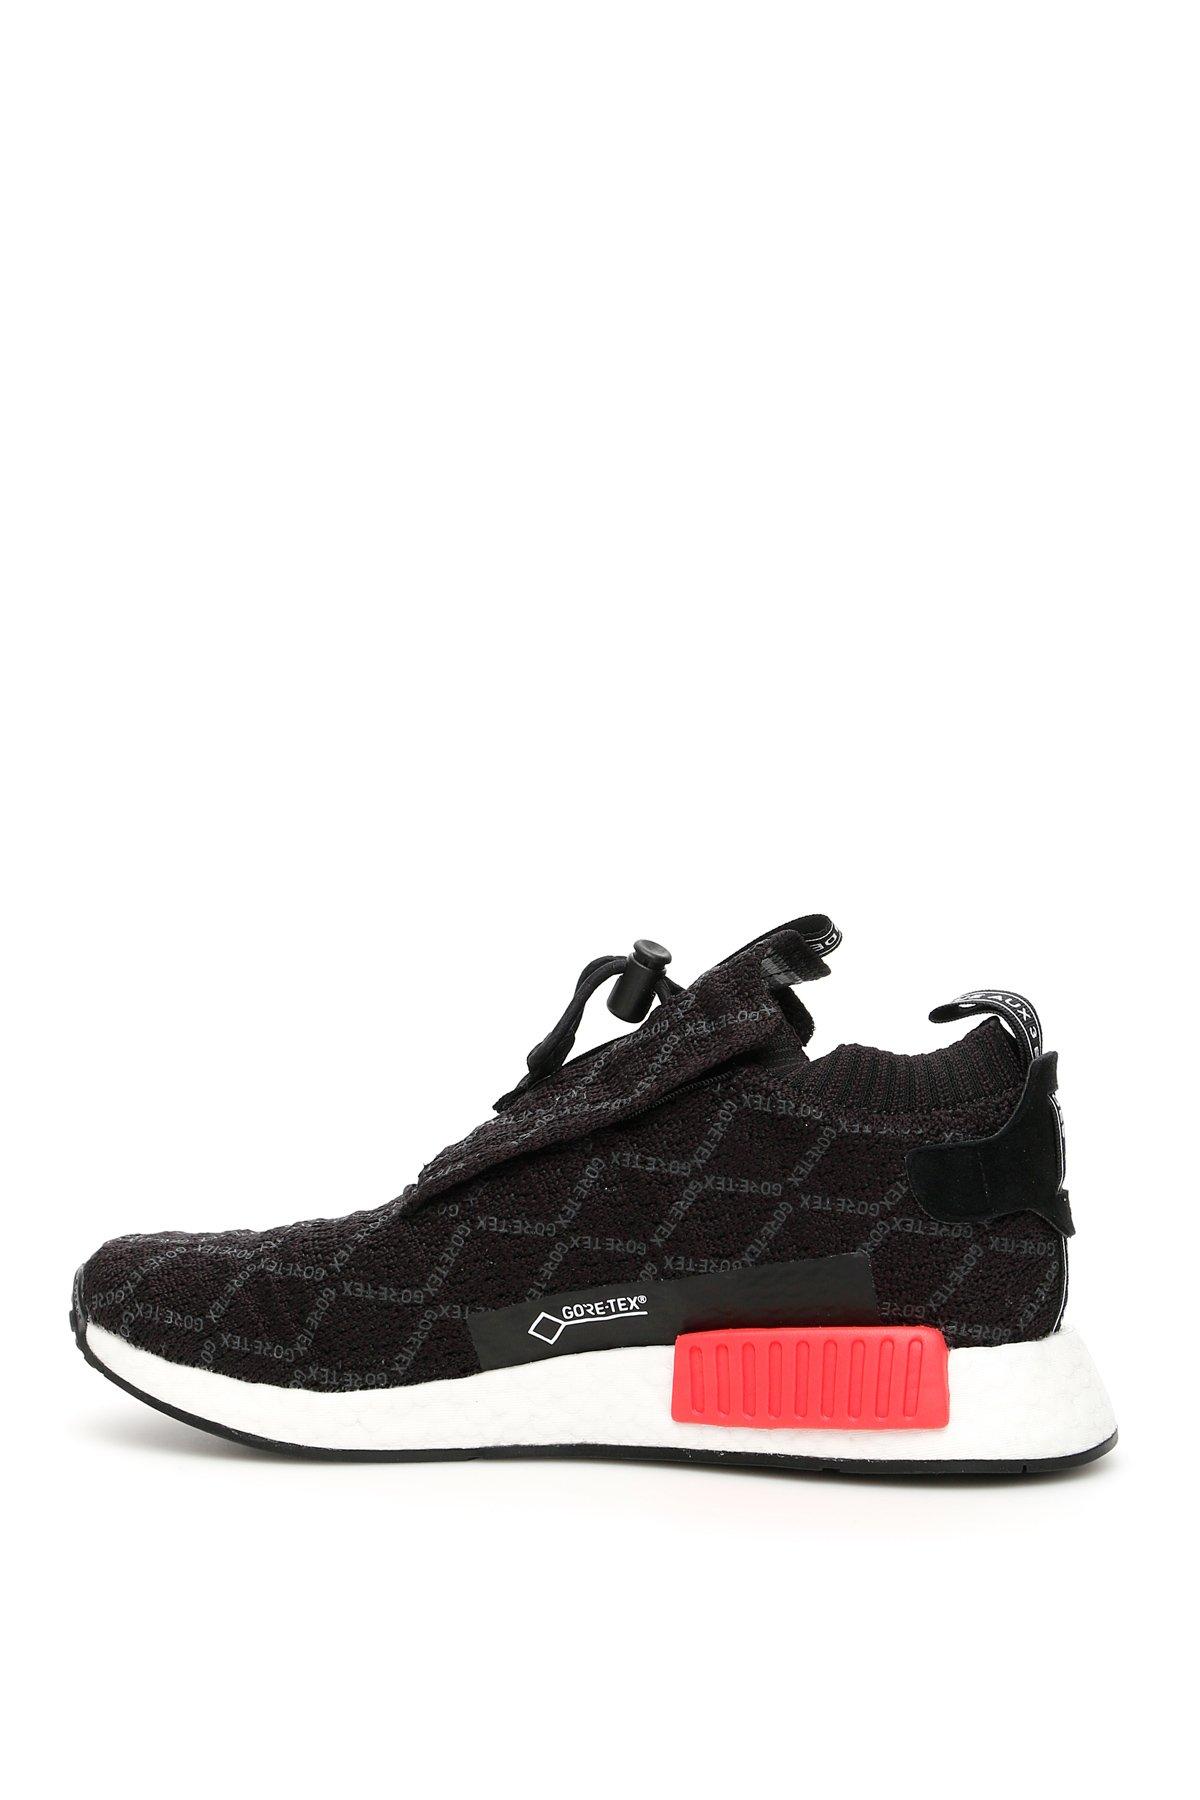 adidas Rubber Nmd Ts1 Pk Sneakers in Black,Red (Black) for Men - Lyst